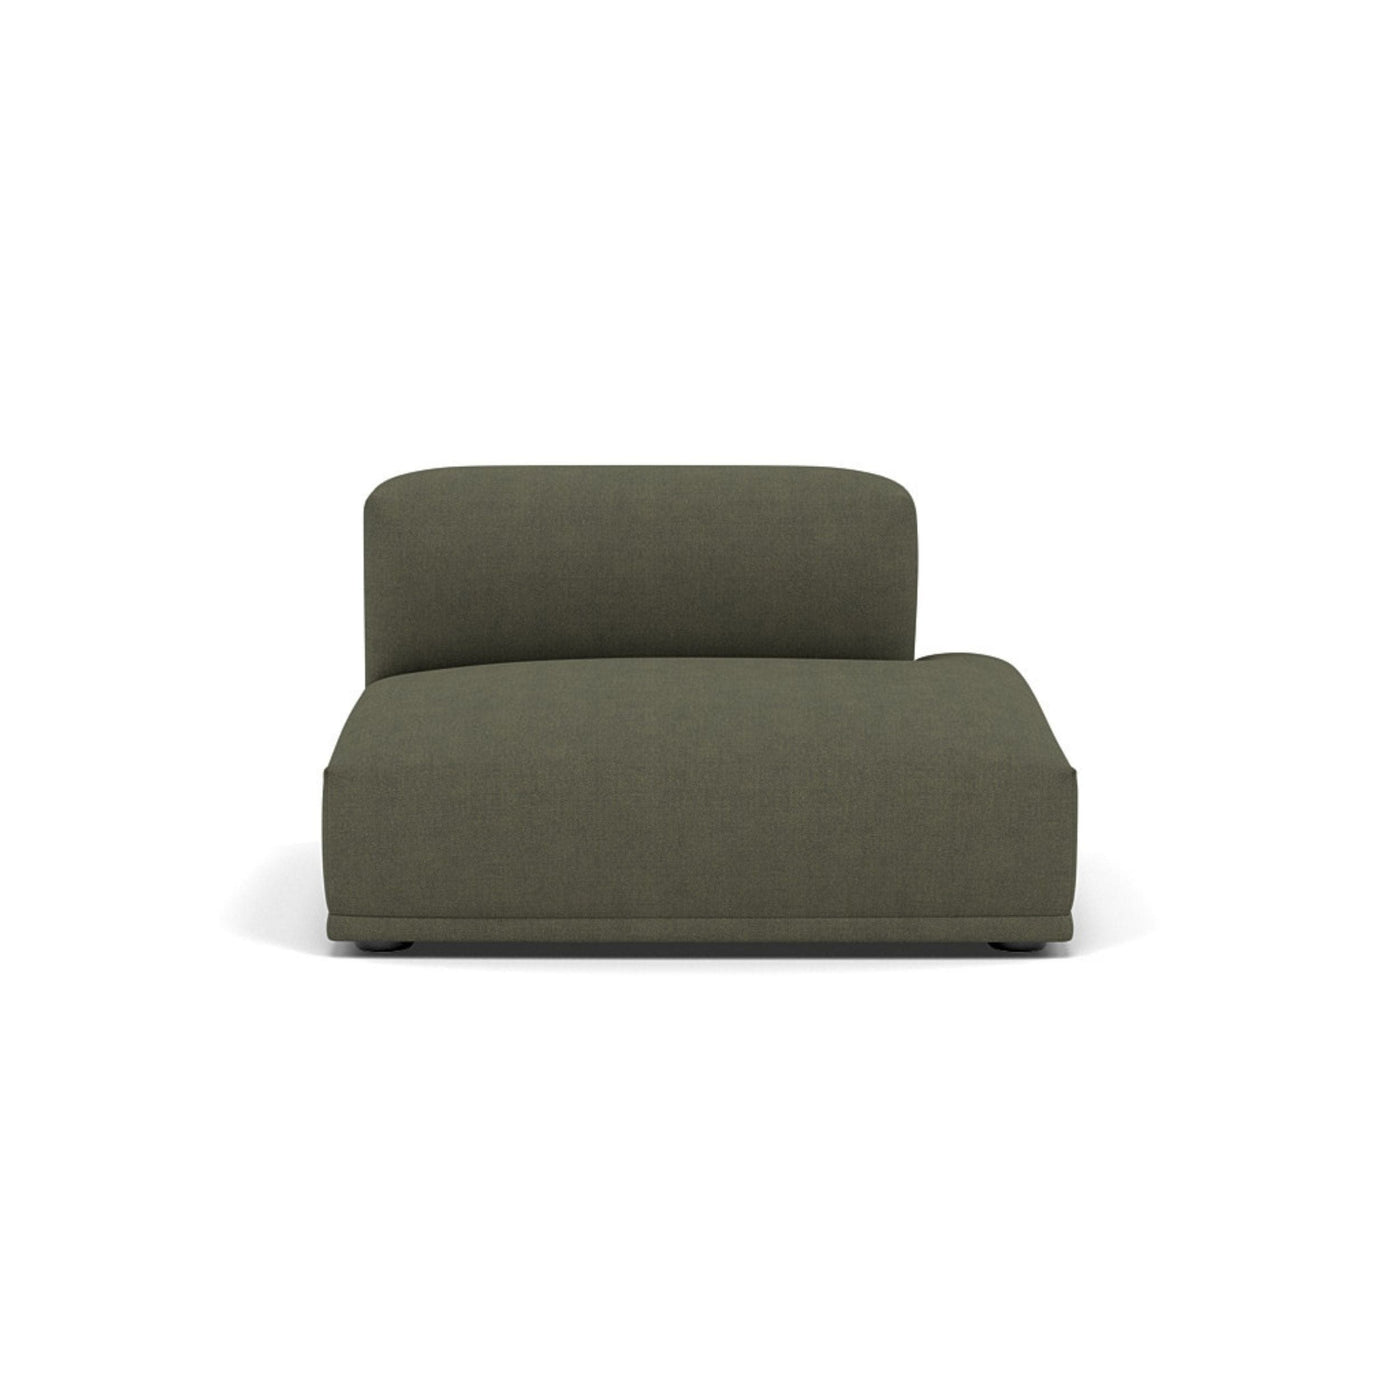 Muuto Connect Modular Sofa System, module g, right open-ended, fiord 961 fabric. Available from someday designs. #colour_fiord-961